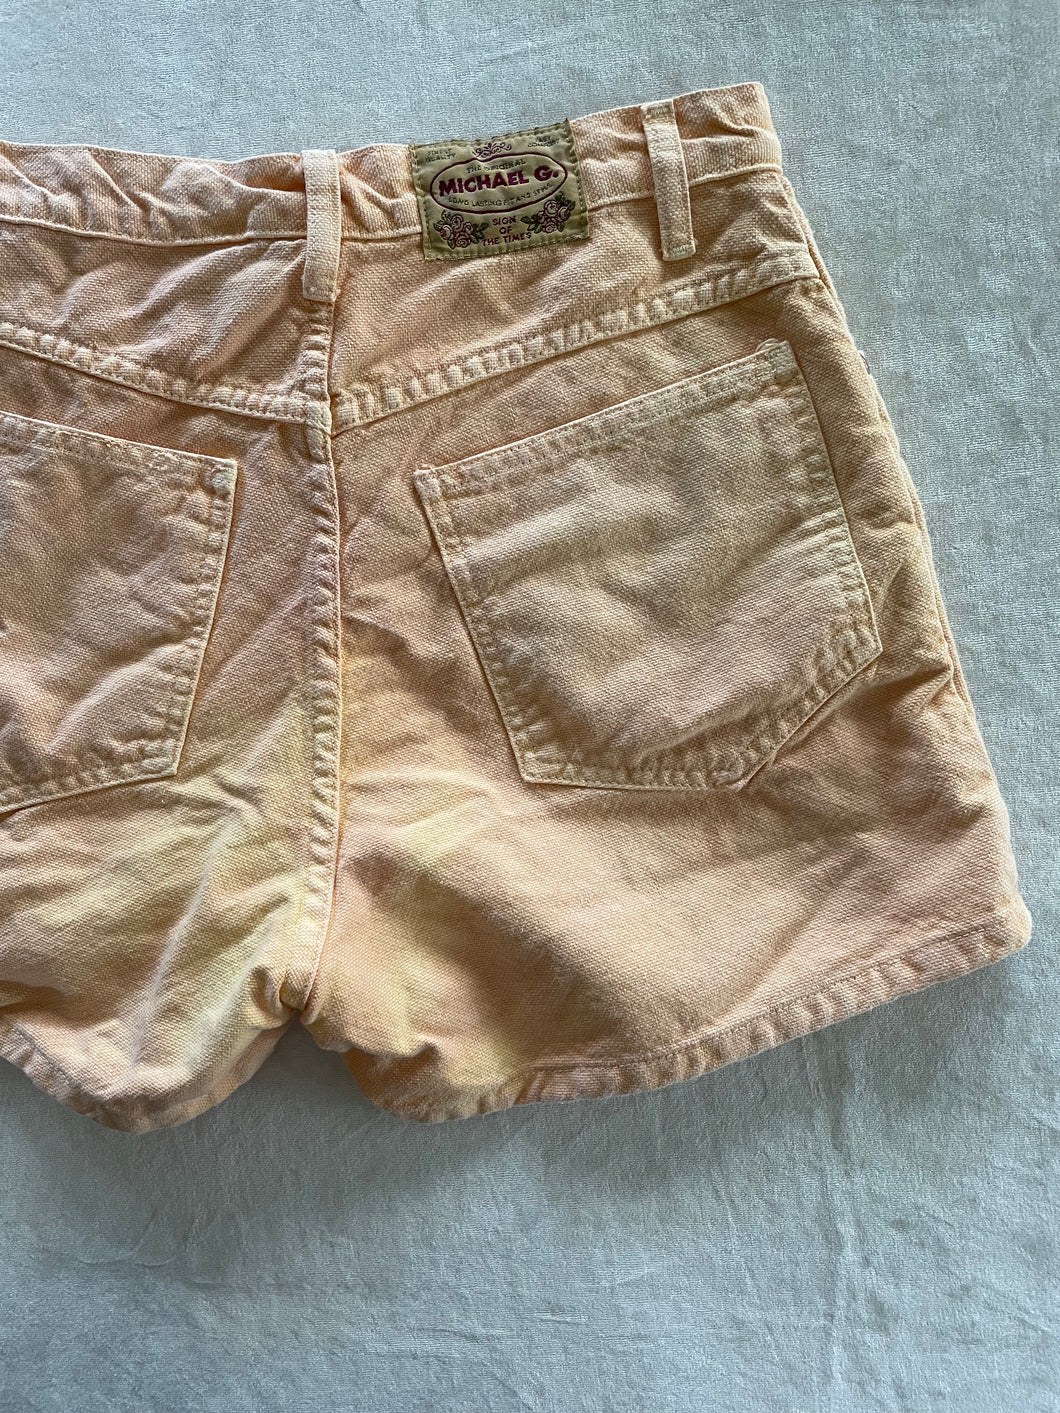 Vintage size 9 ‘Micheal G’ high waisted shorts